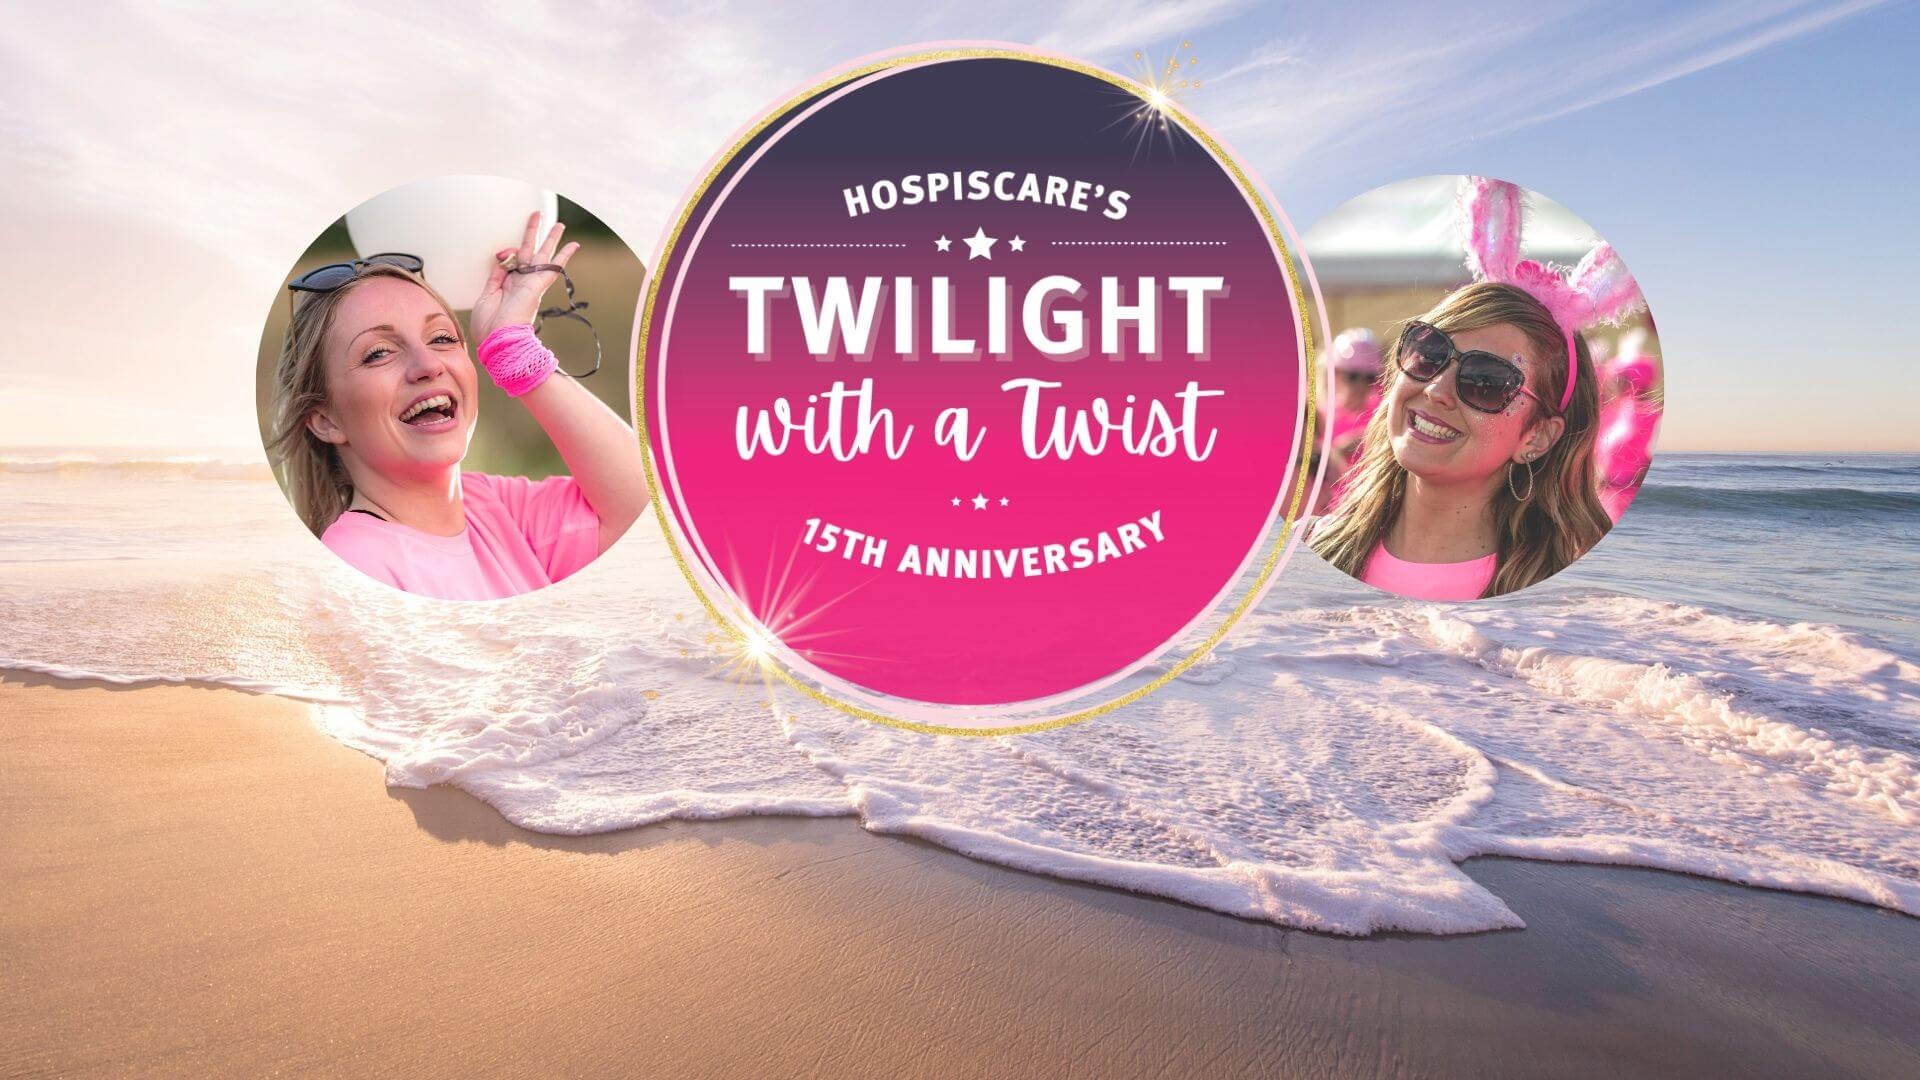 Twilight with a Twist: How to take part